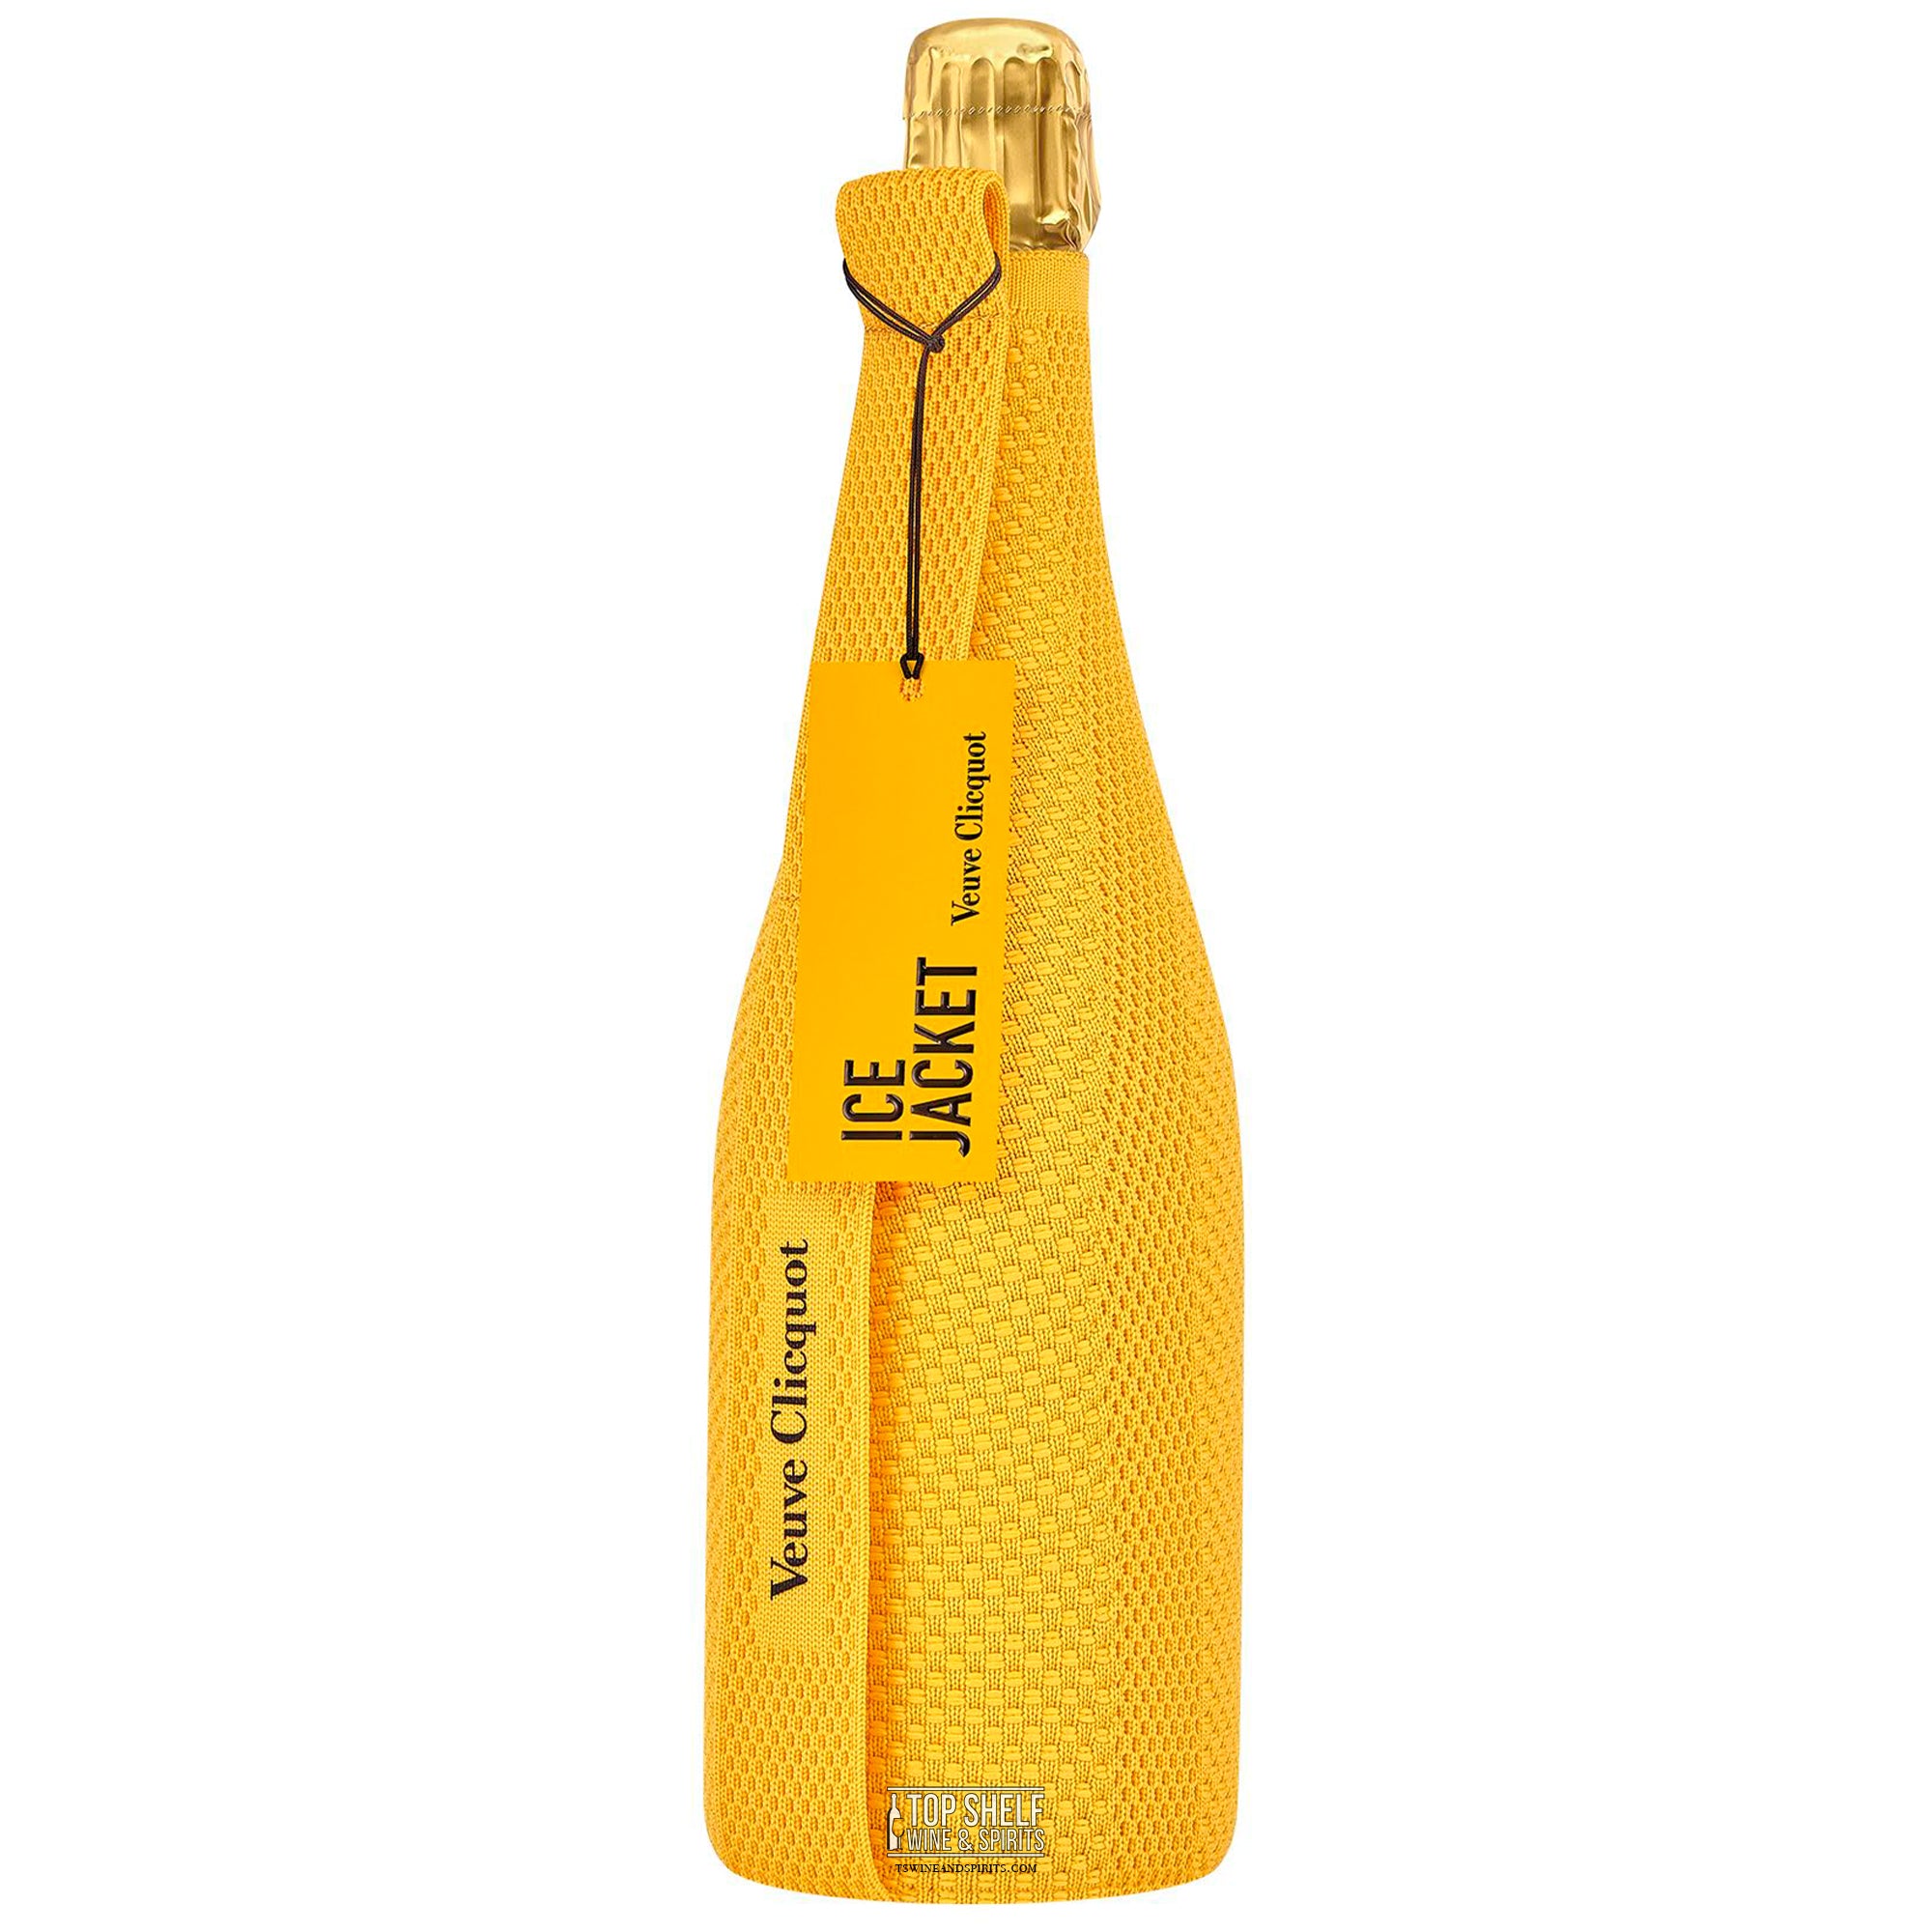 Veuve Clicquot Brut Champagne with Ice Jacket